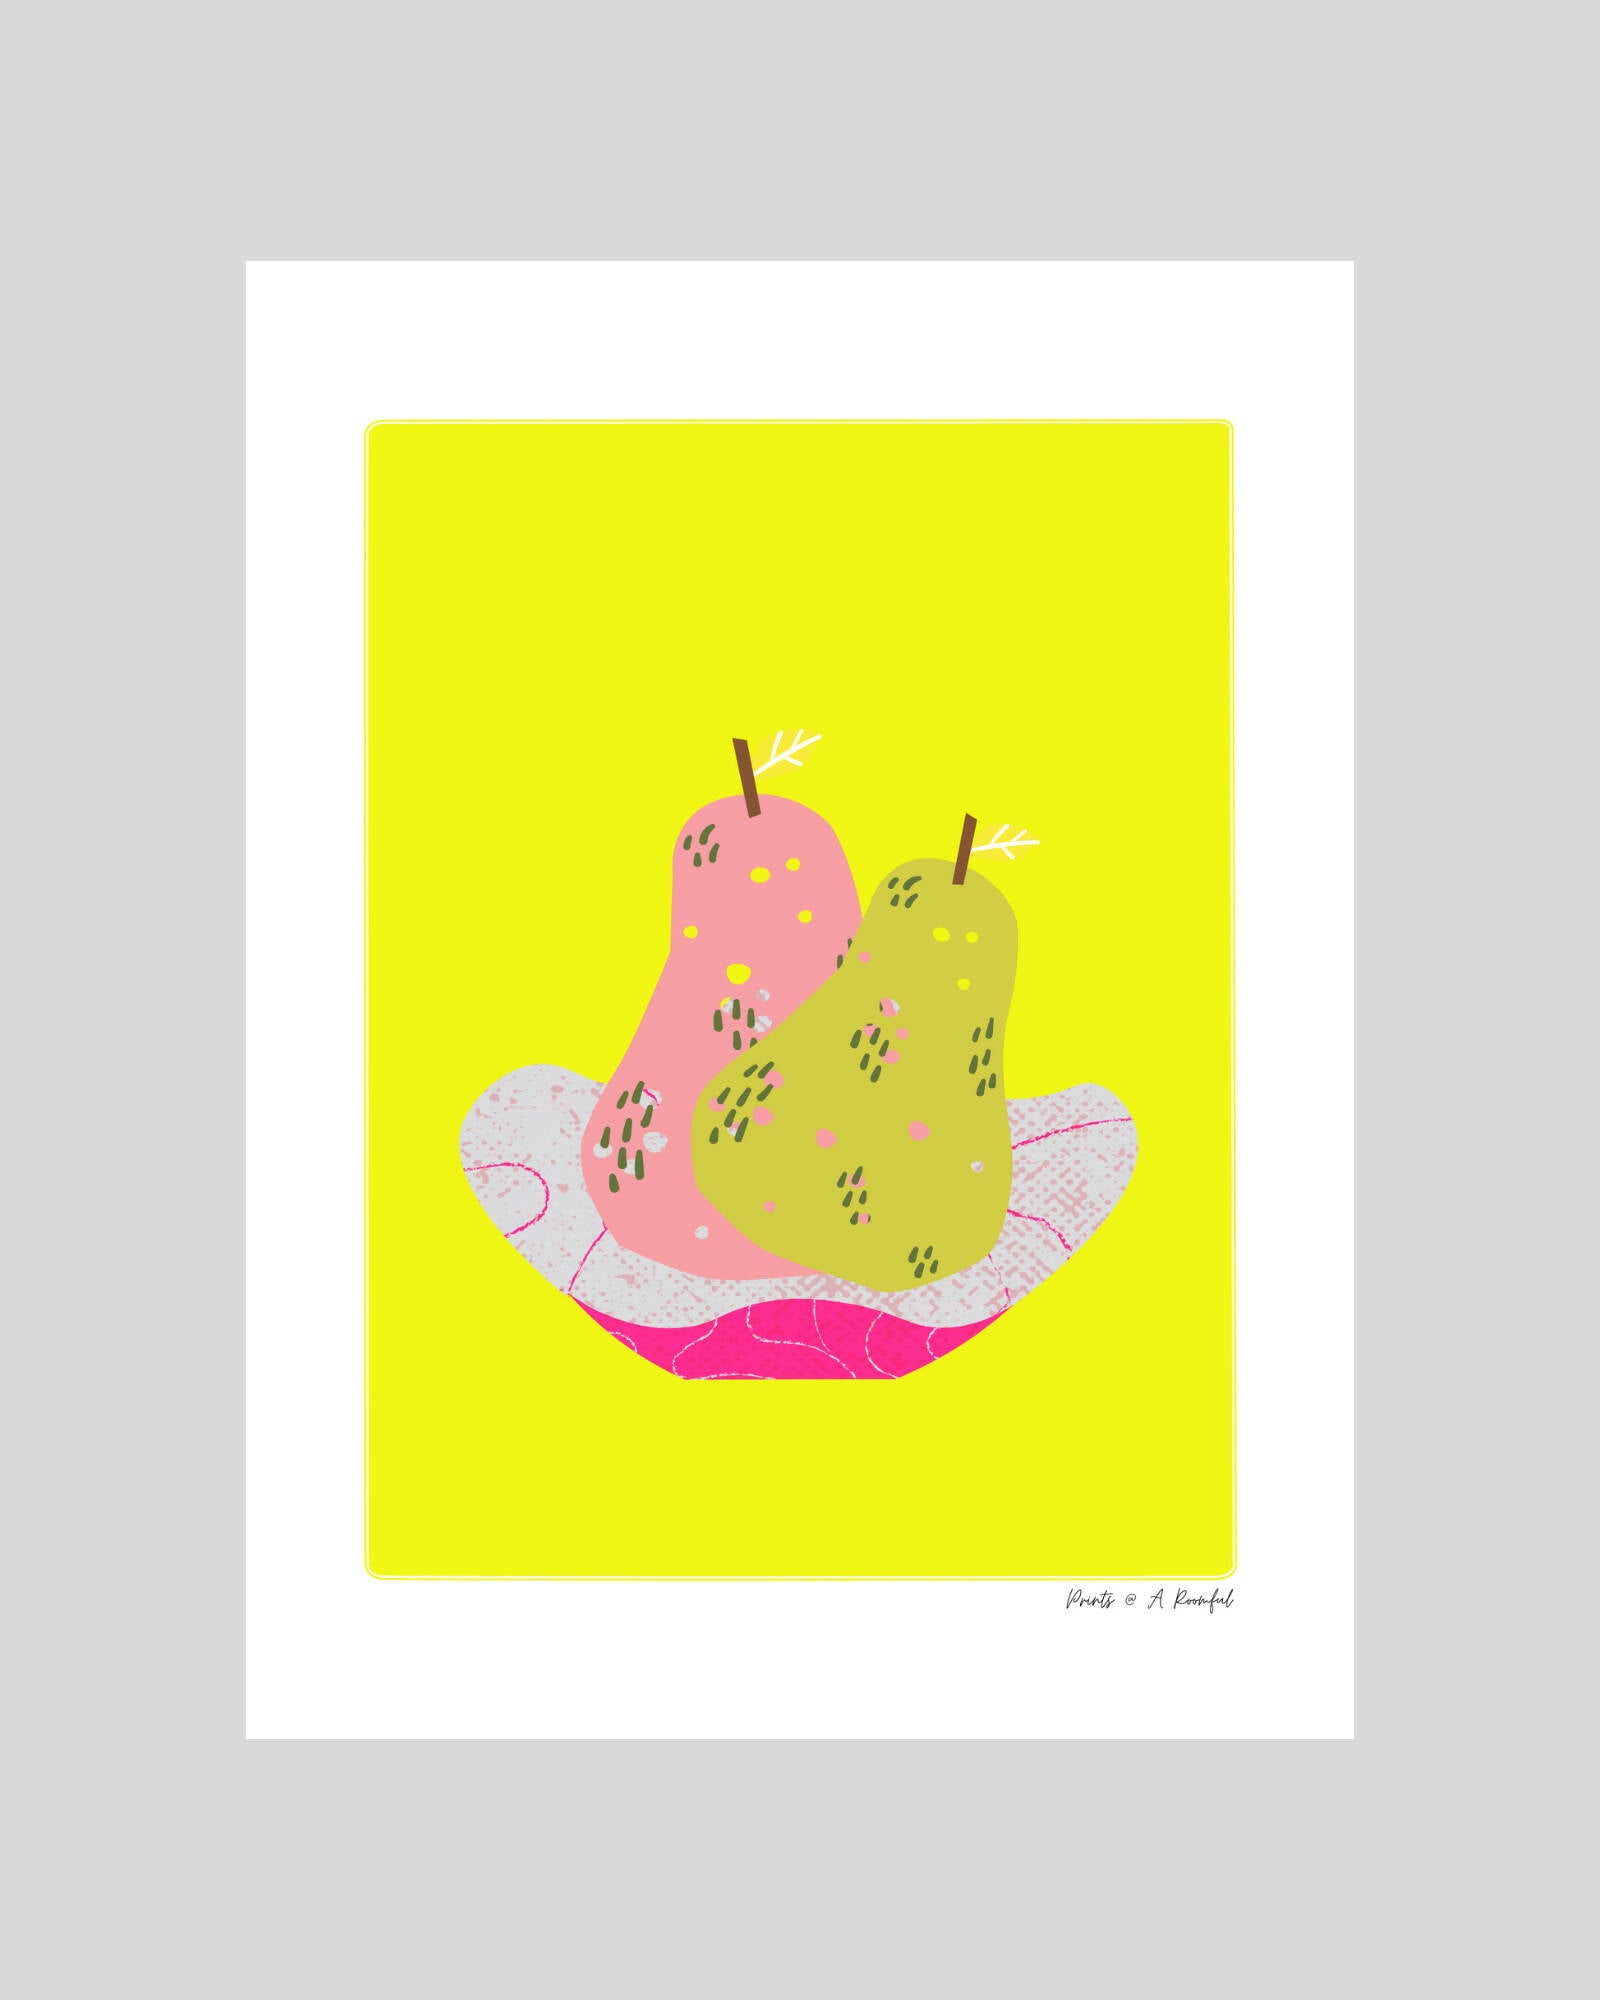 wall art : inspired by colours and fruits (pears) Art Prints@ARoomful 